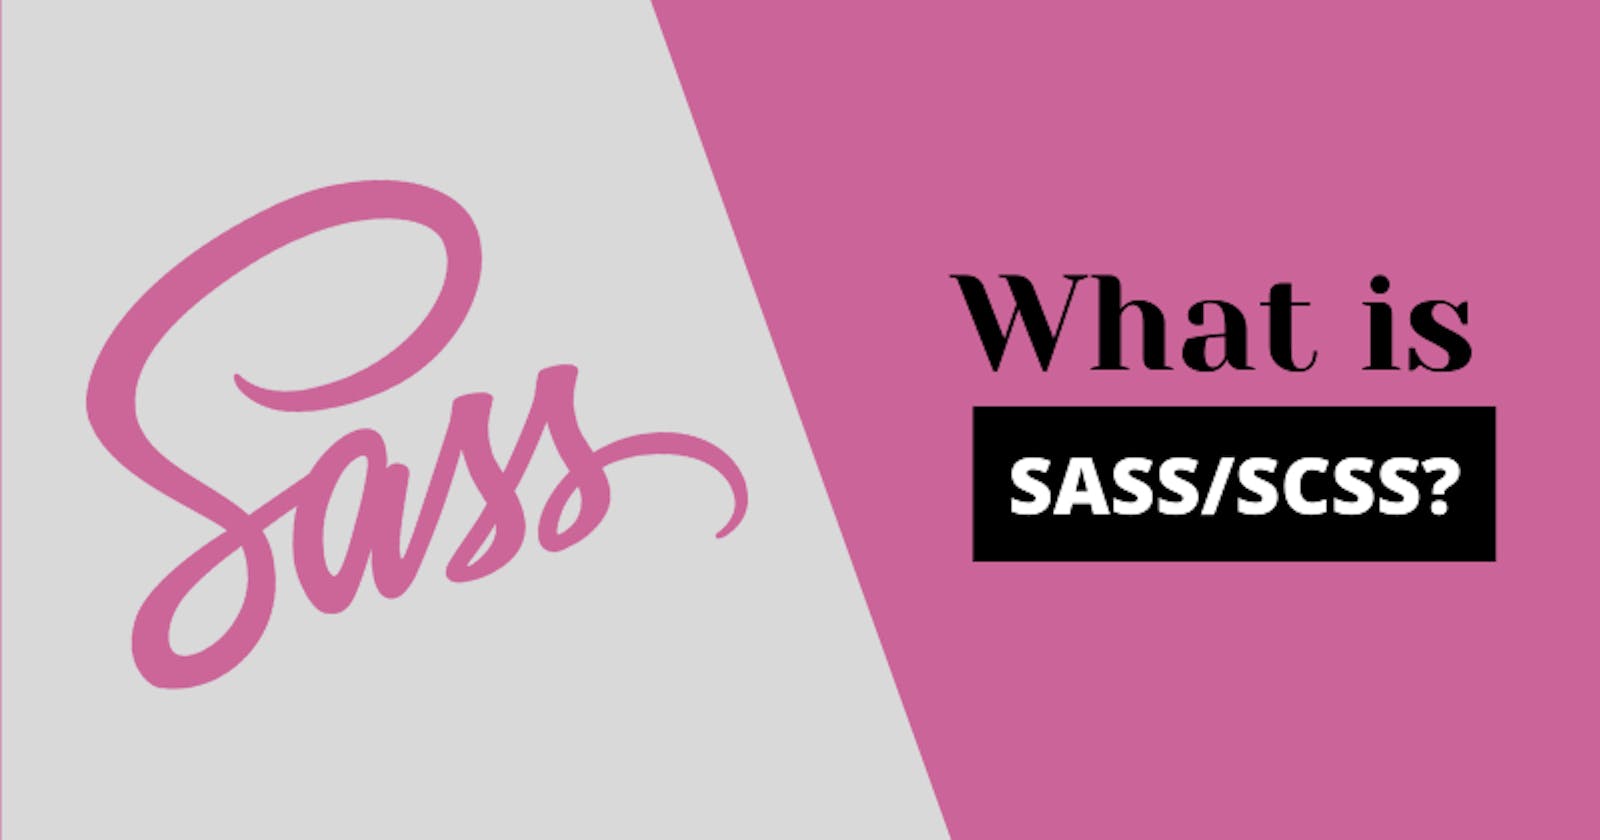 What is SASS/SCSS?